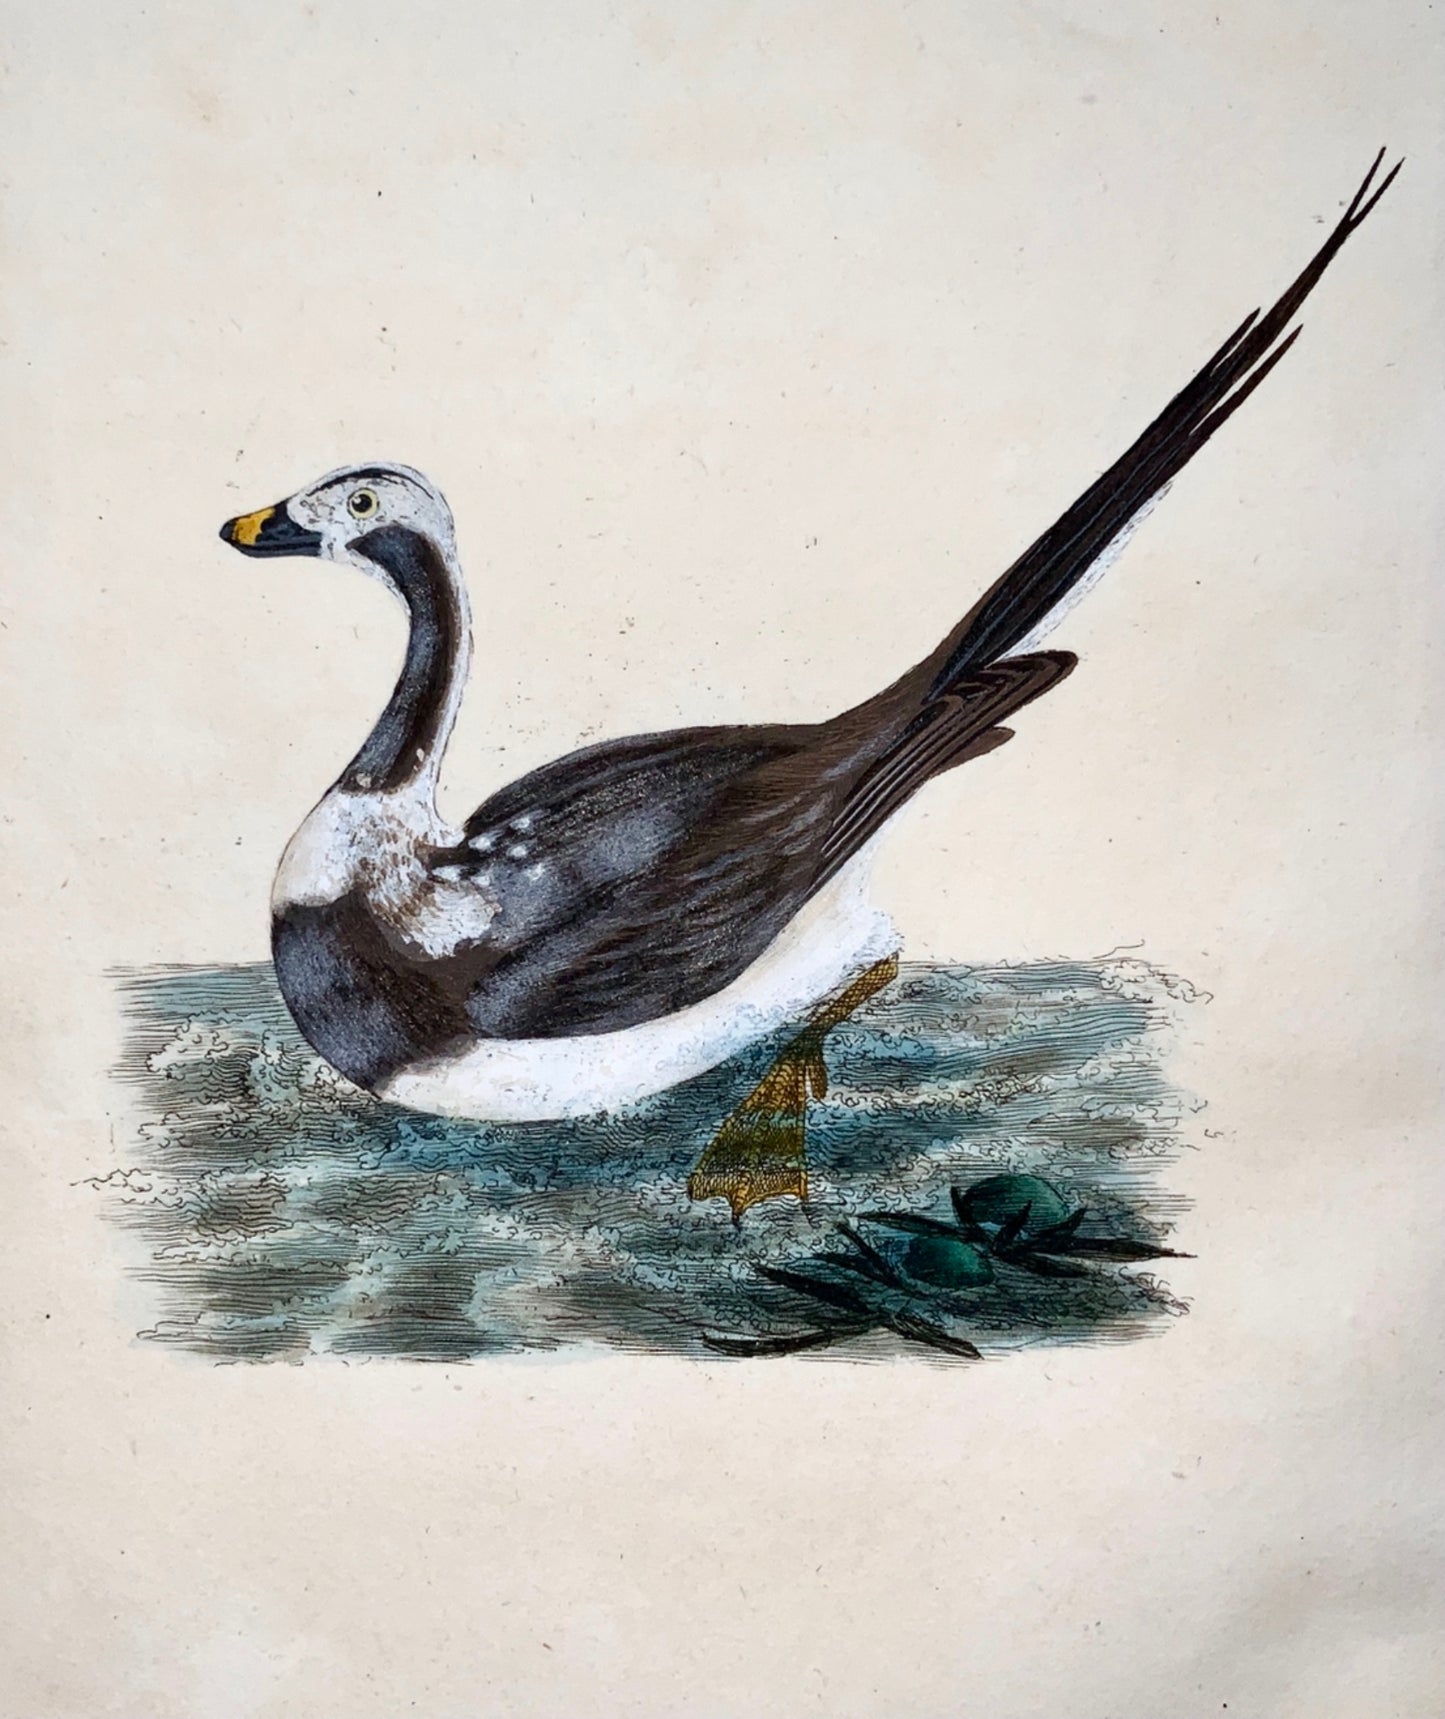 1794 Edward Donovan - LONG TAILED DUCK Ornithology - exquisite hand coloured copper engraving